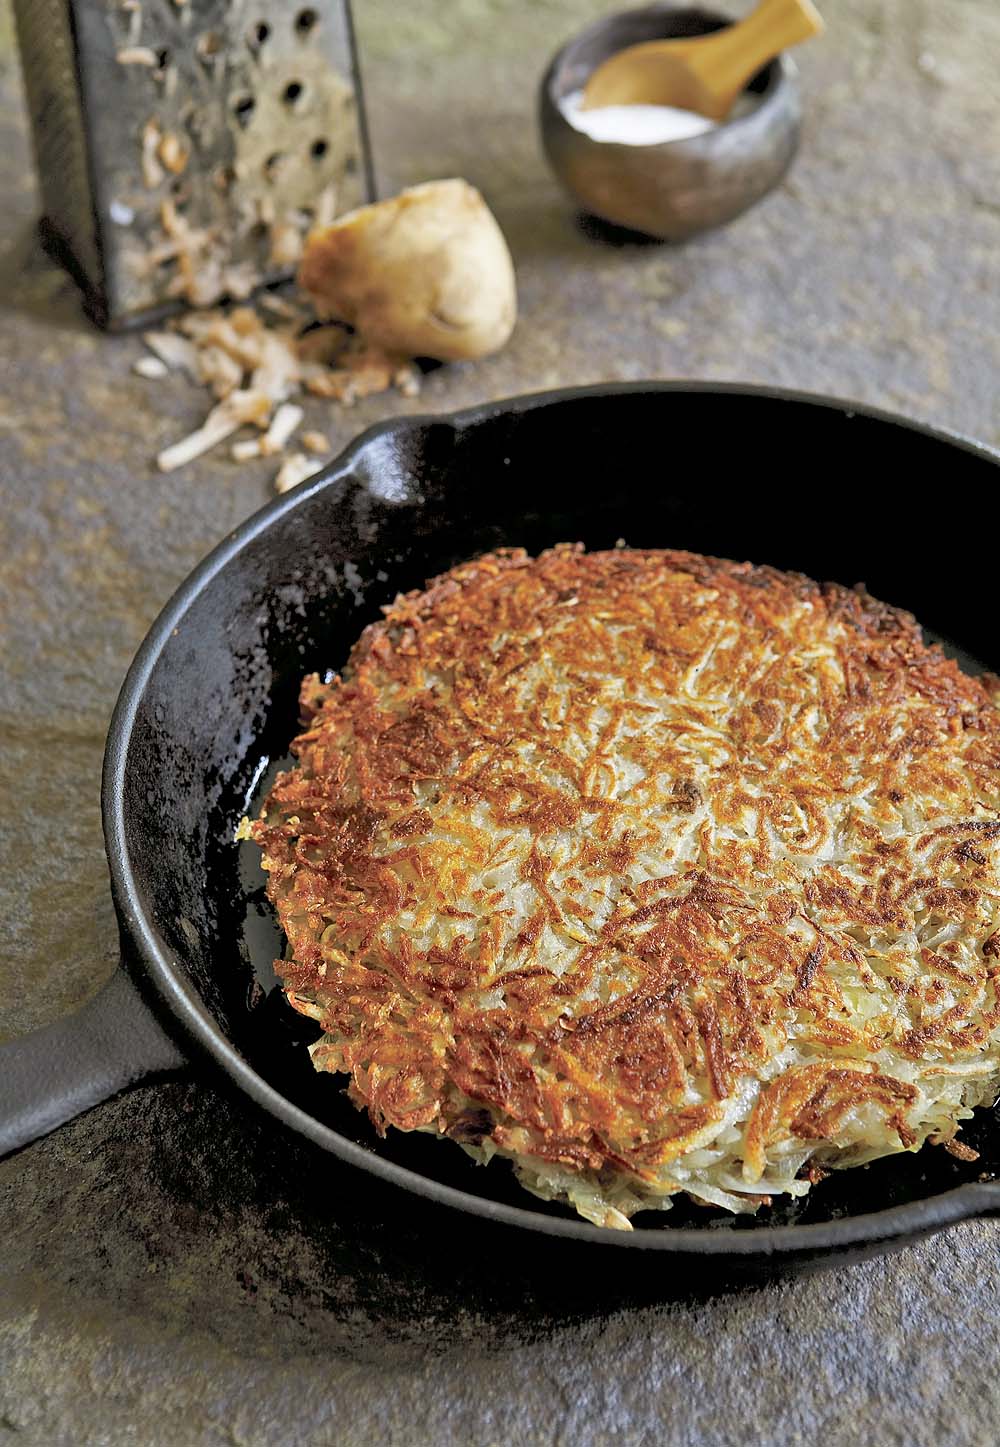 Shredded Potato Cake with Leeks and Cheese.